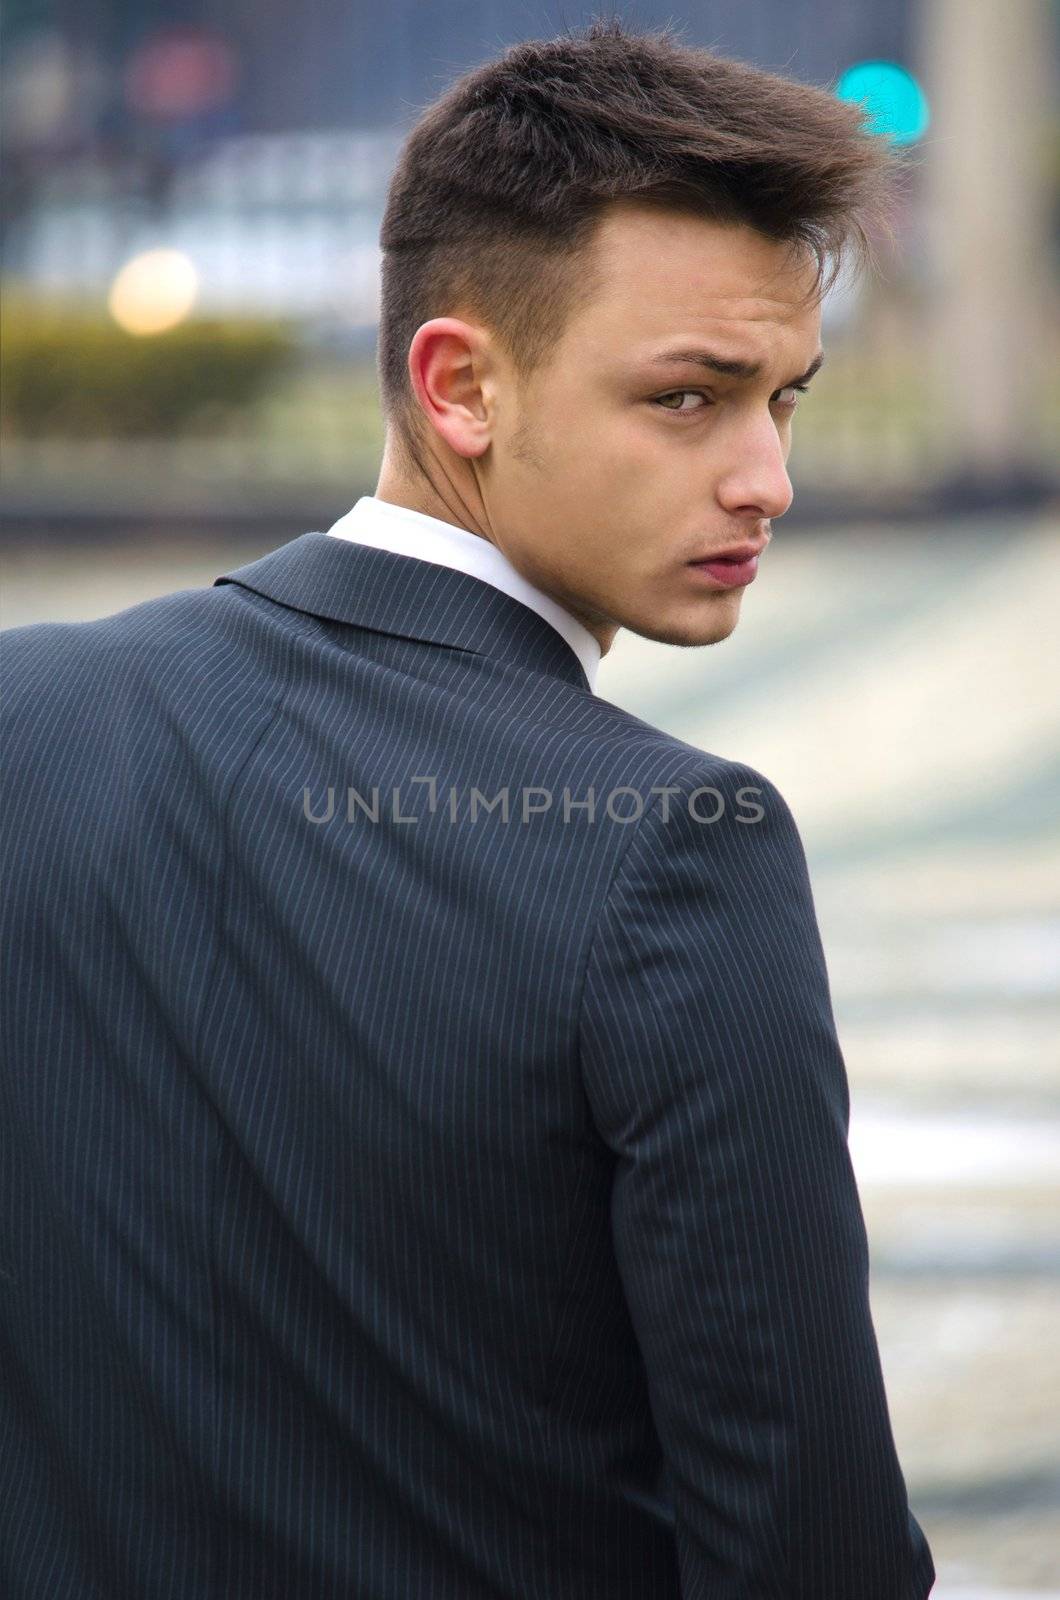 Good looking young man in suit, back view by artofphoto